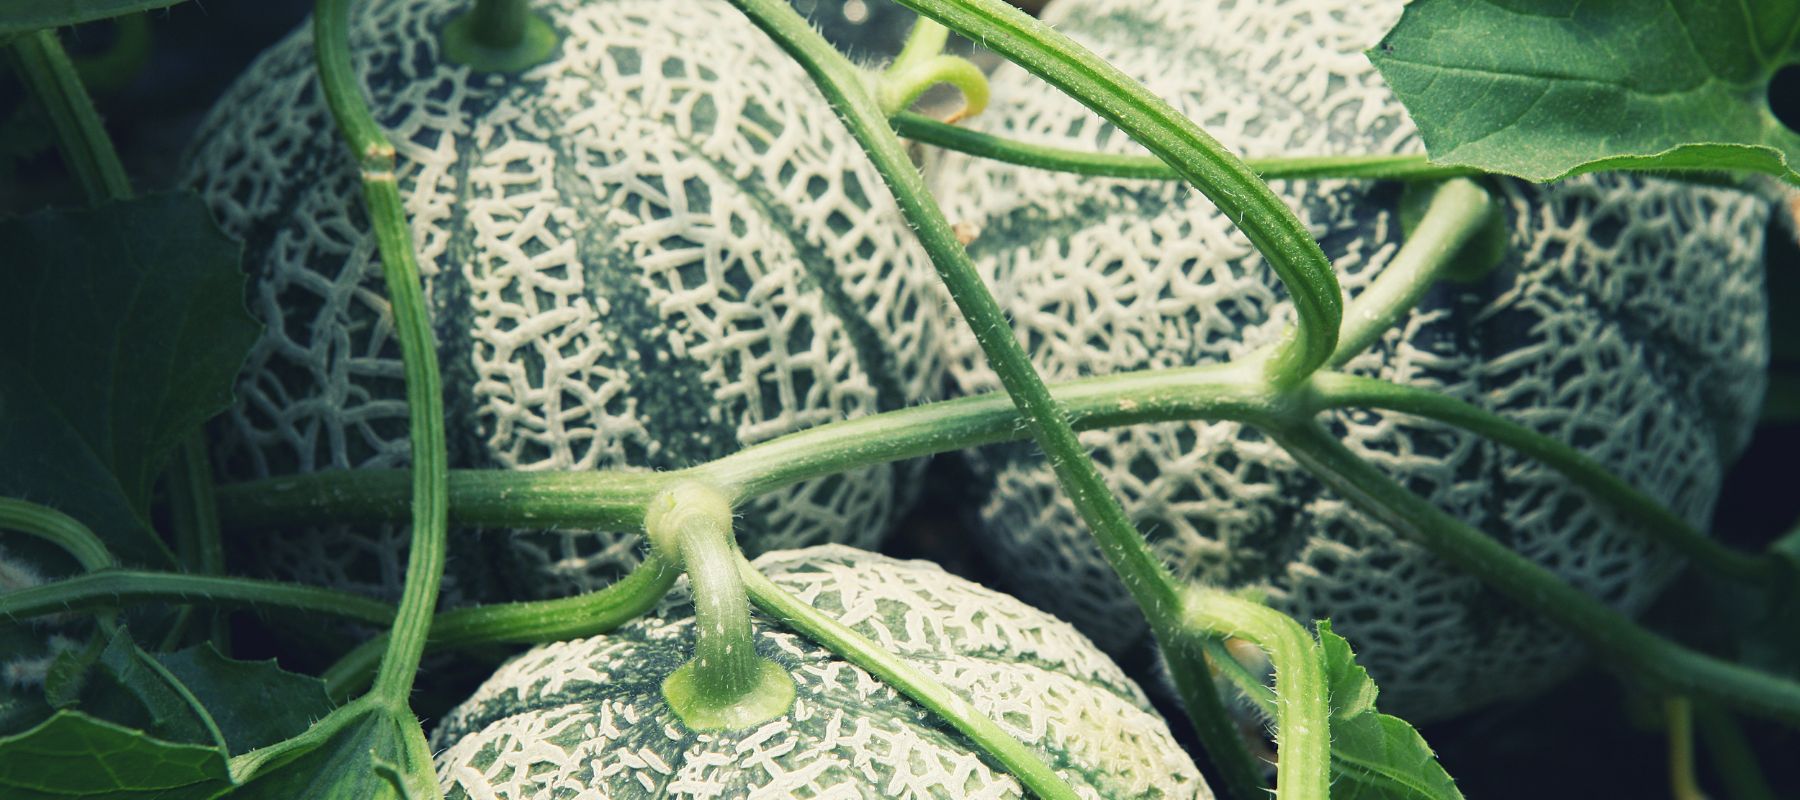 Discover the beauty and flavour of heirloom melons